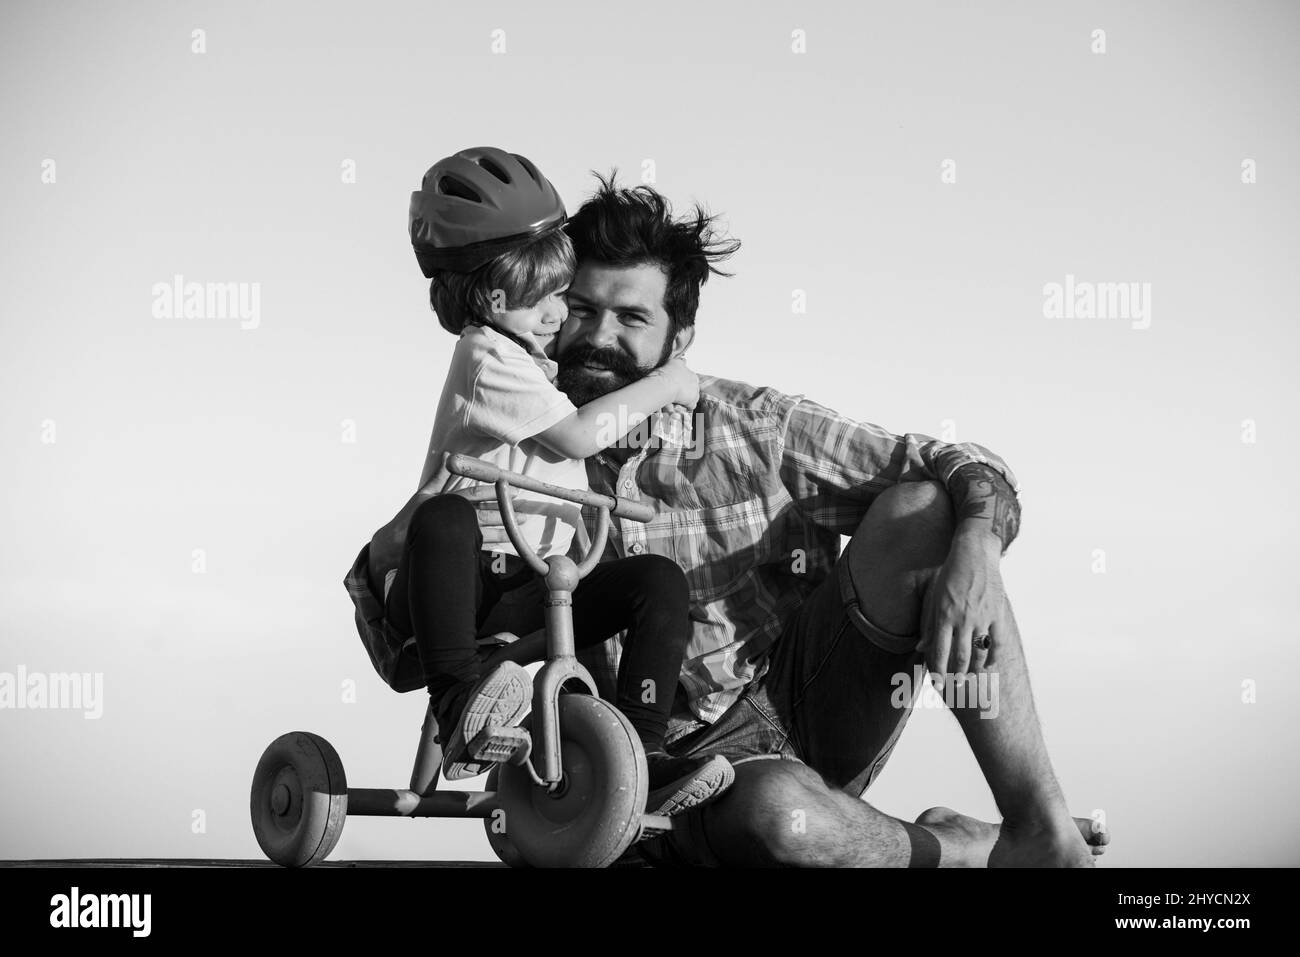 Lovely father teaching son riding bike. Happy dad helping excited son to ride a bicycle. Young smiling boy wearing helmet while learning to ride cycle Stock Photo